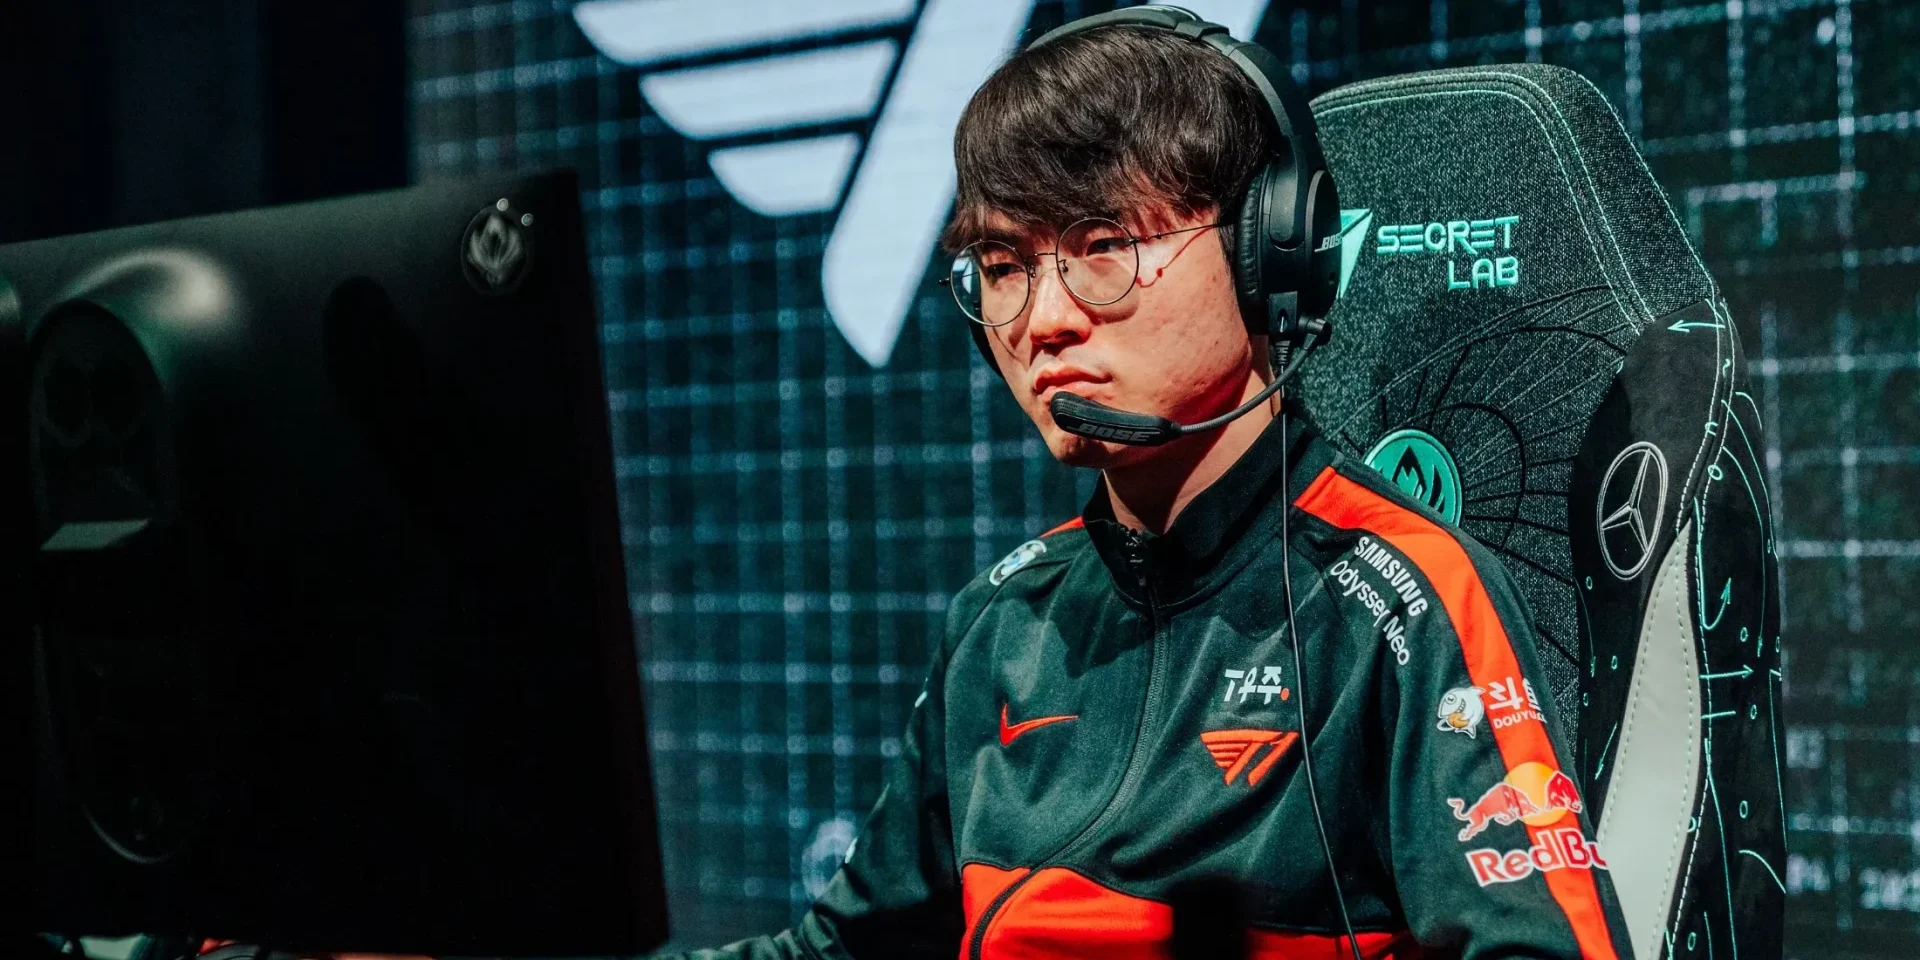 Script leaked: LCK Summer Playoffs is hilariously similar to last postseason